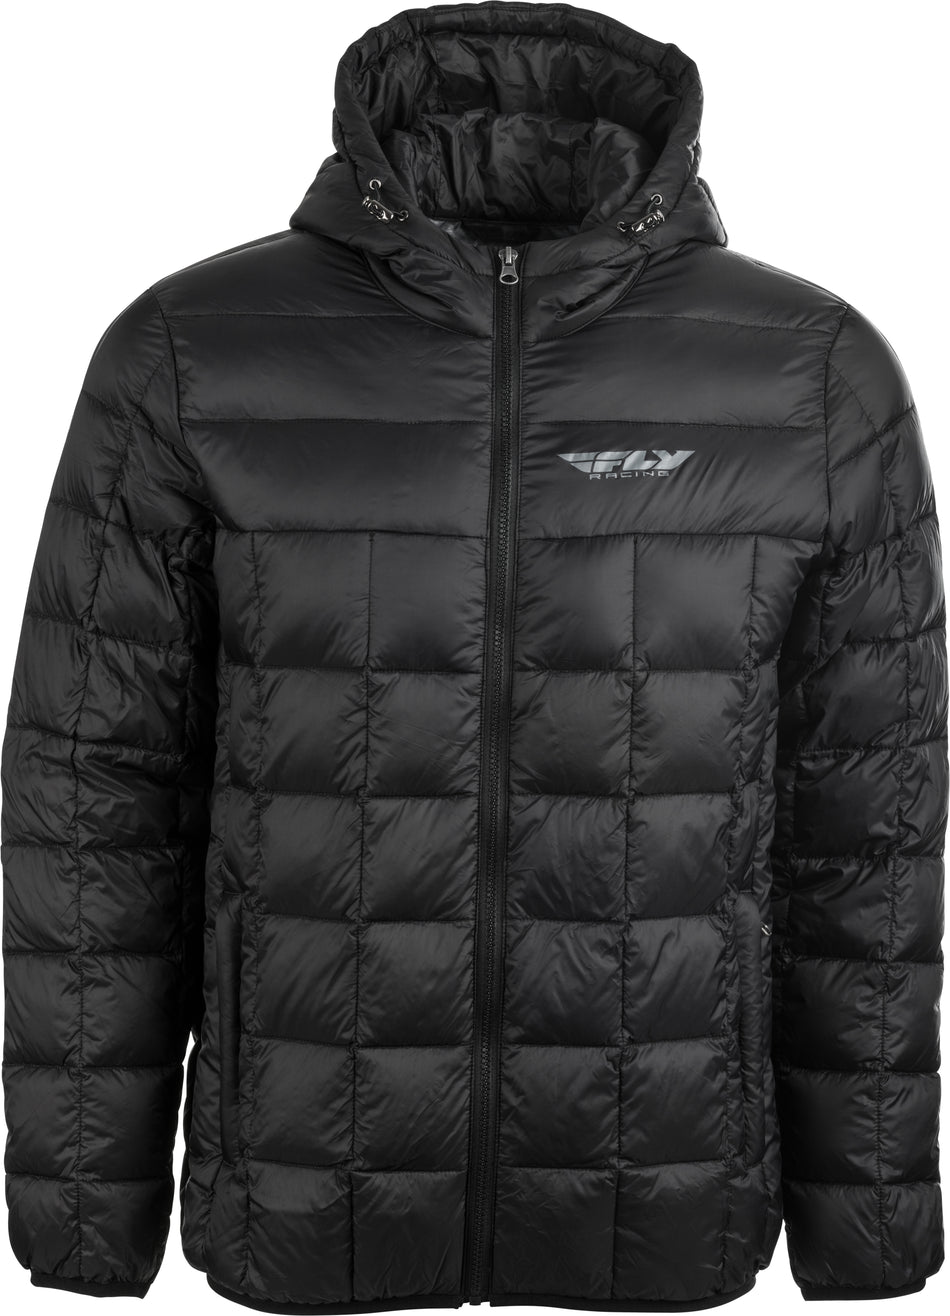 FLY RACING Fly Spark Down Jacket Black 2x 354-61802X